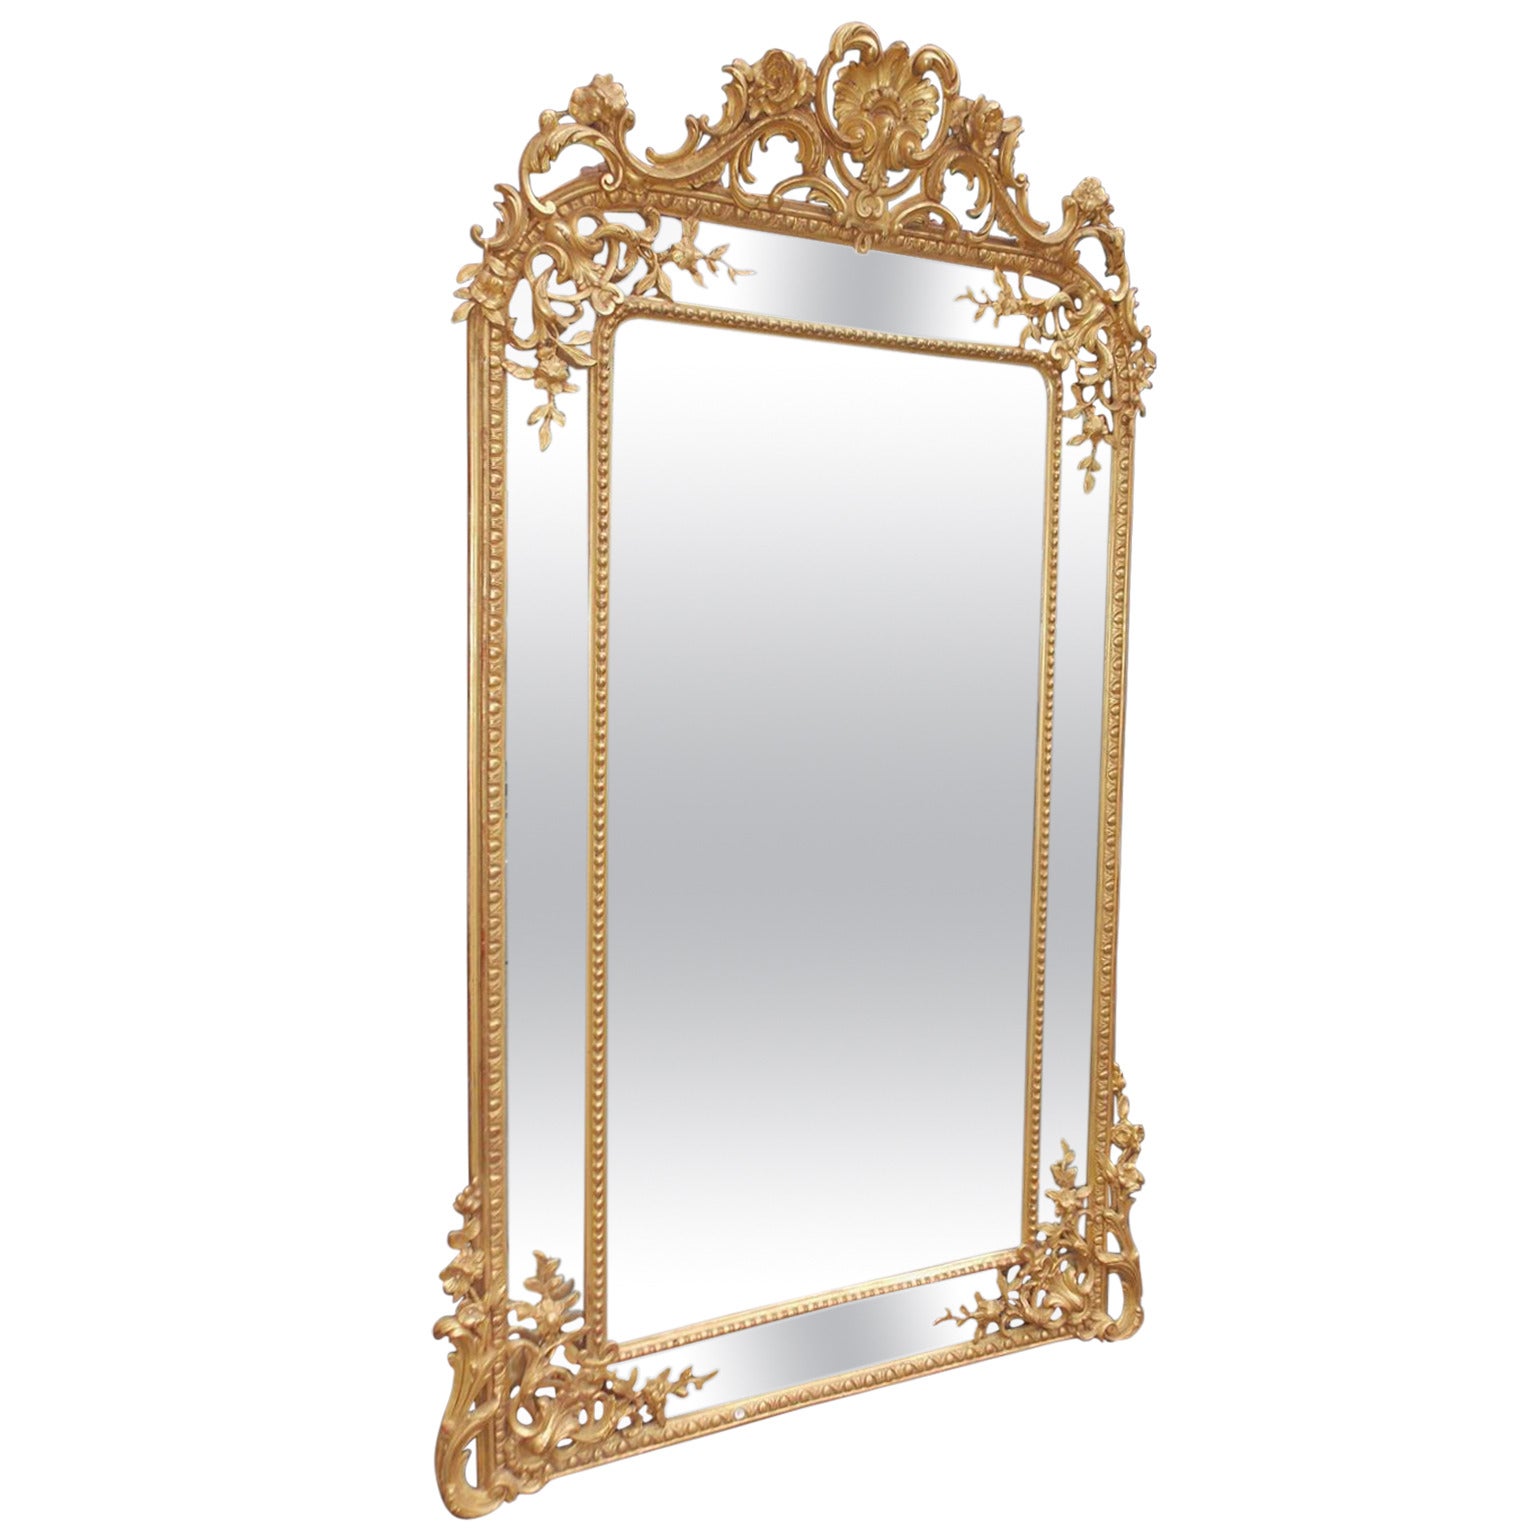 English Gilt Wood and Gesso Foliage Cartouche Wall Mirror, Circa 1820 For Sale